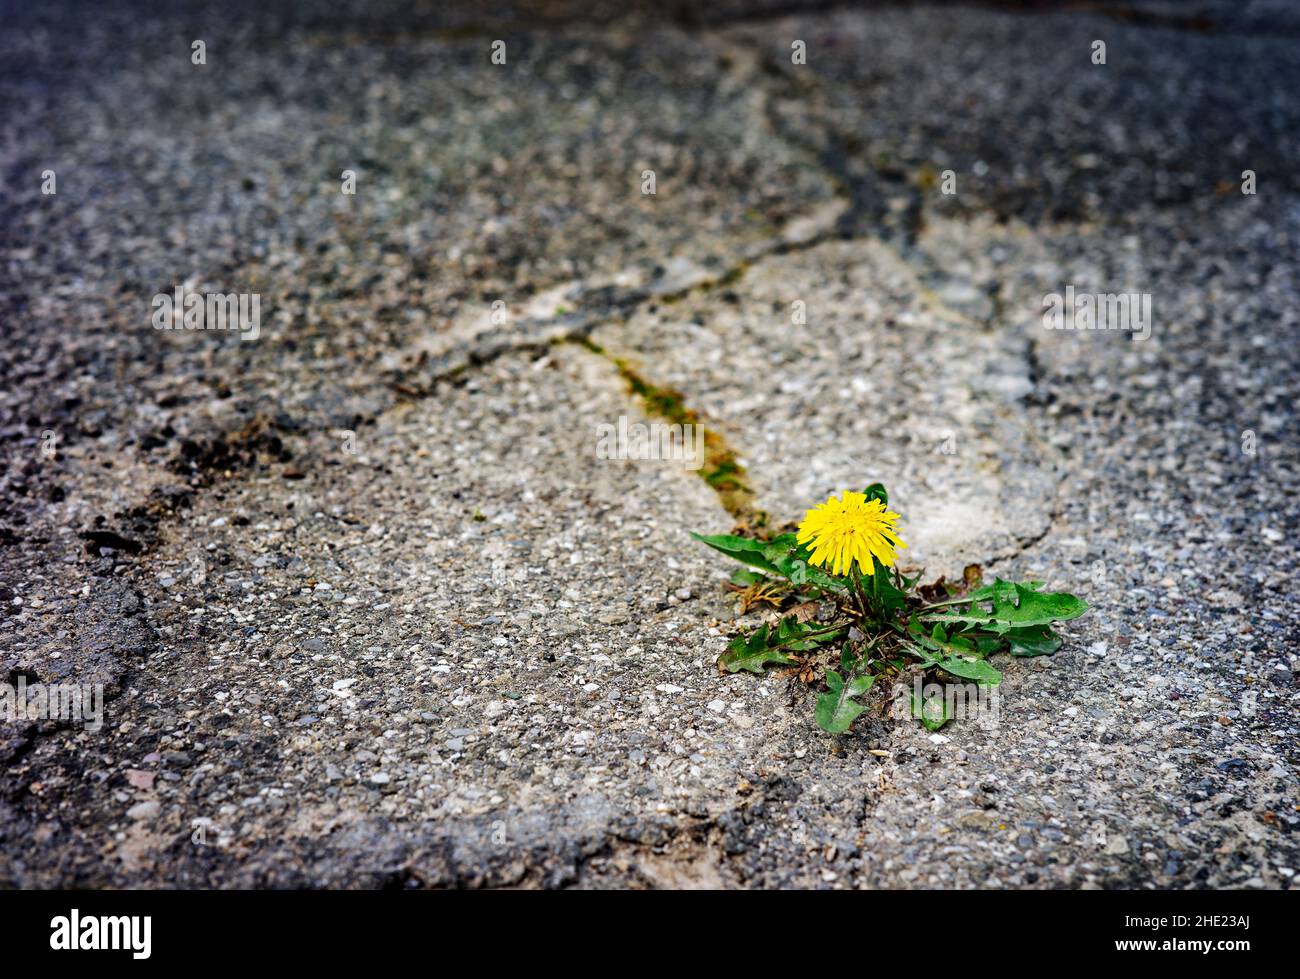 Dandelion growing outside of hard terrain surrounded with asphalt. Stock Photo